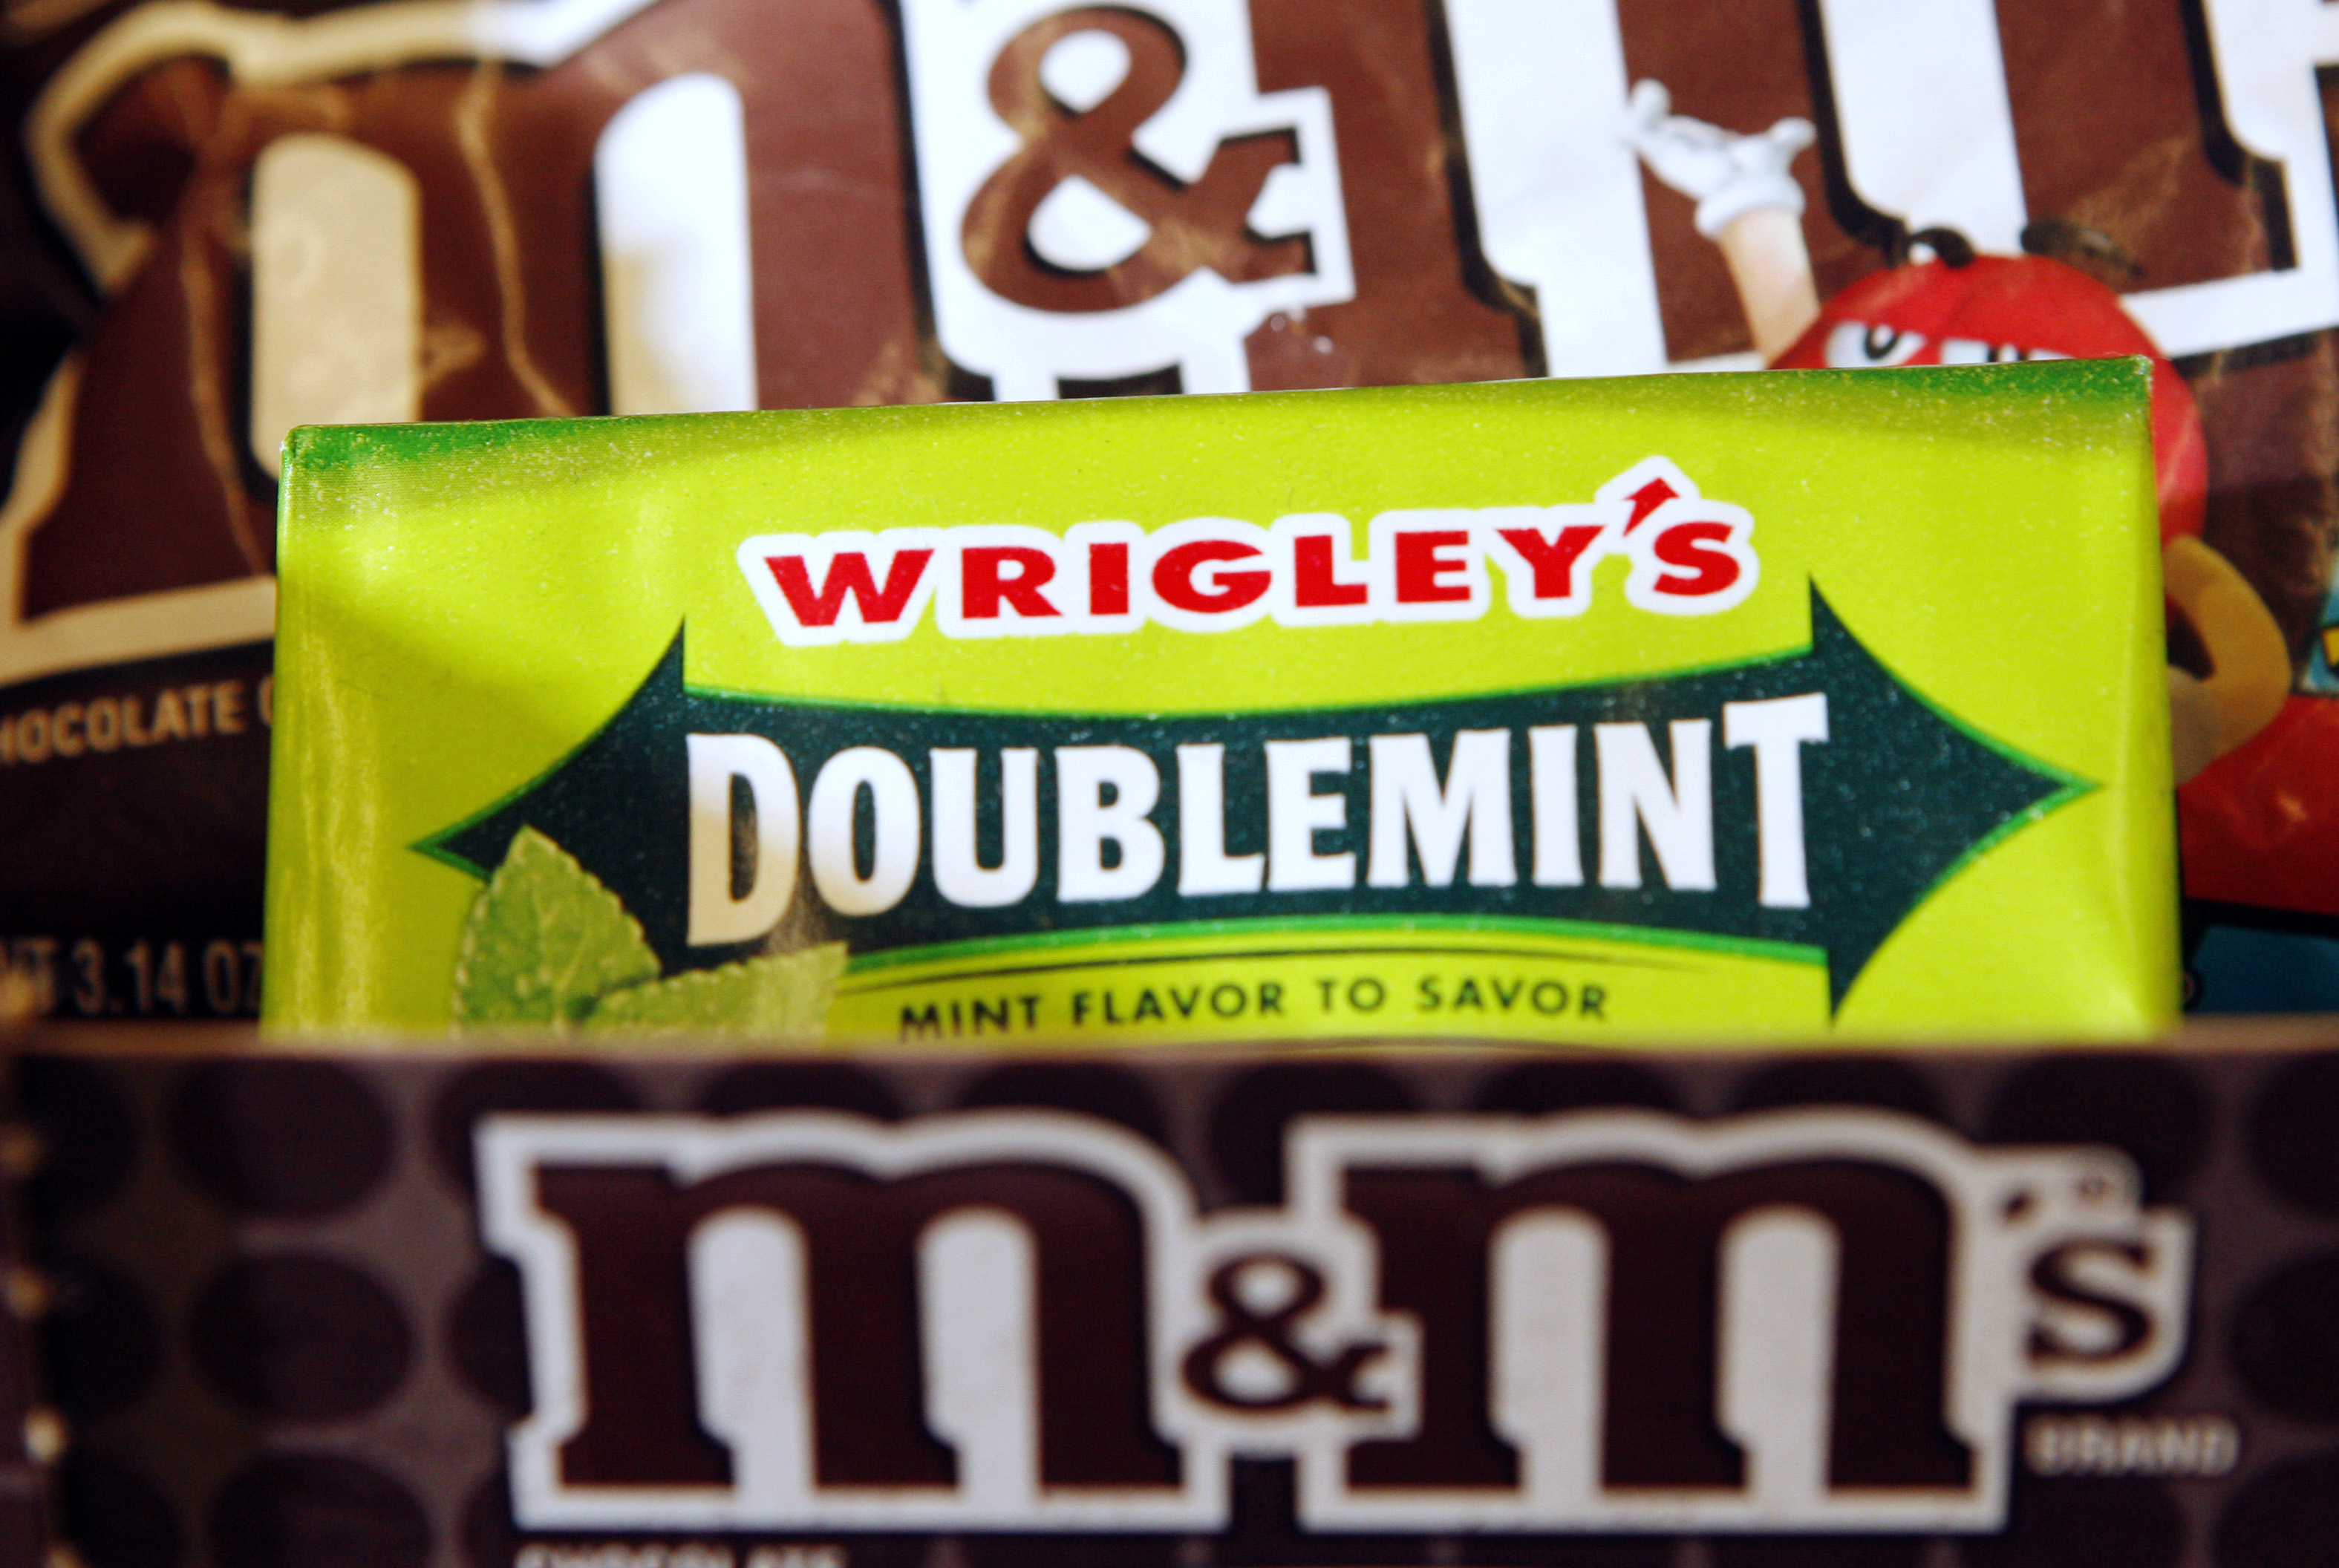 M&M's candies and pack of Wrigley's Doublemint gum in this photo illustration at a convenience store in Medford